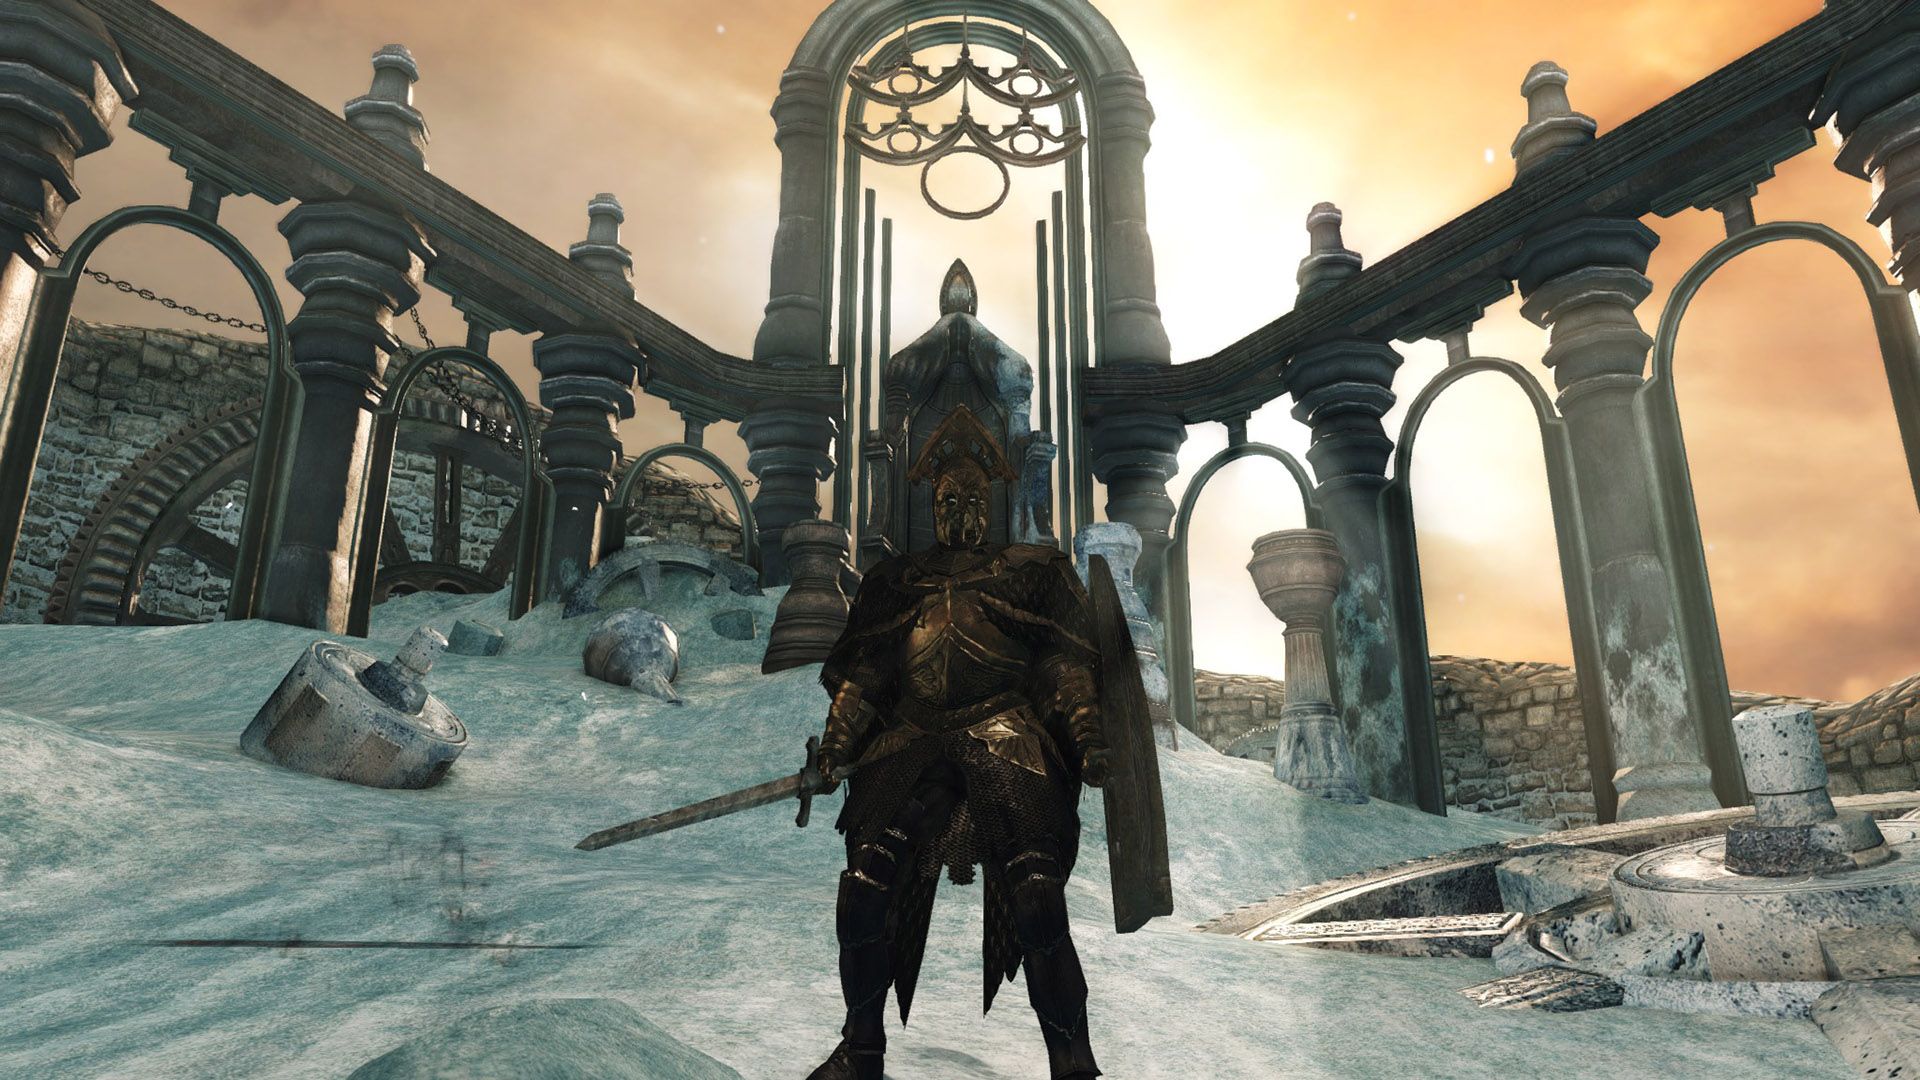 Dark Souls 3 is familiar, fierce and fascinating - review